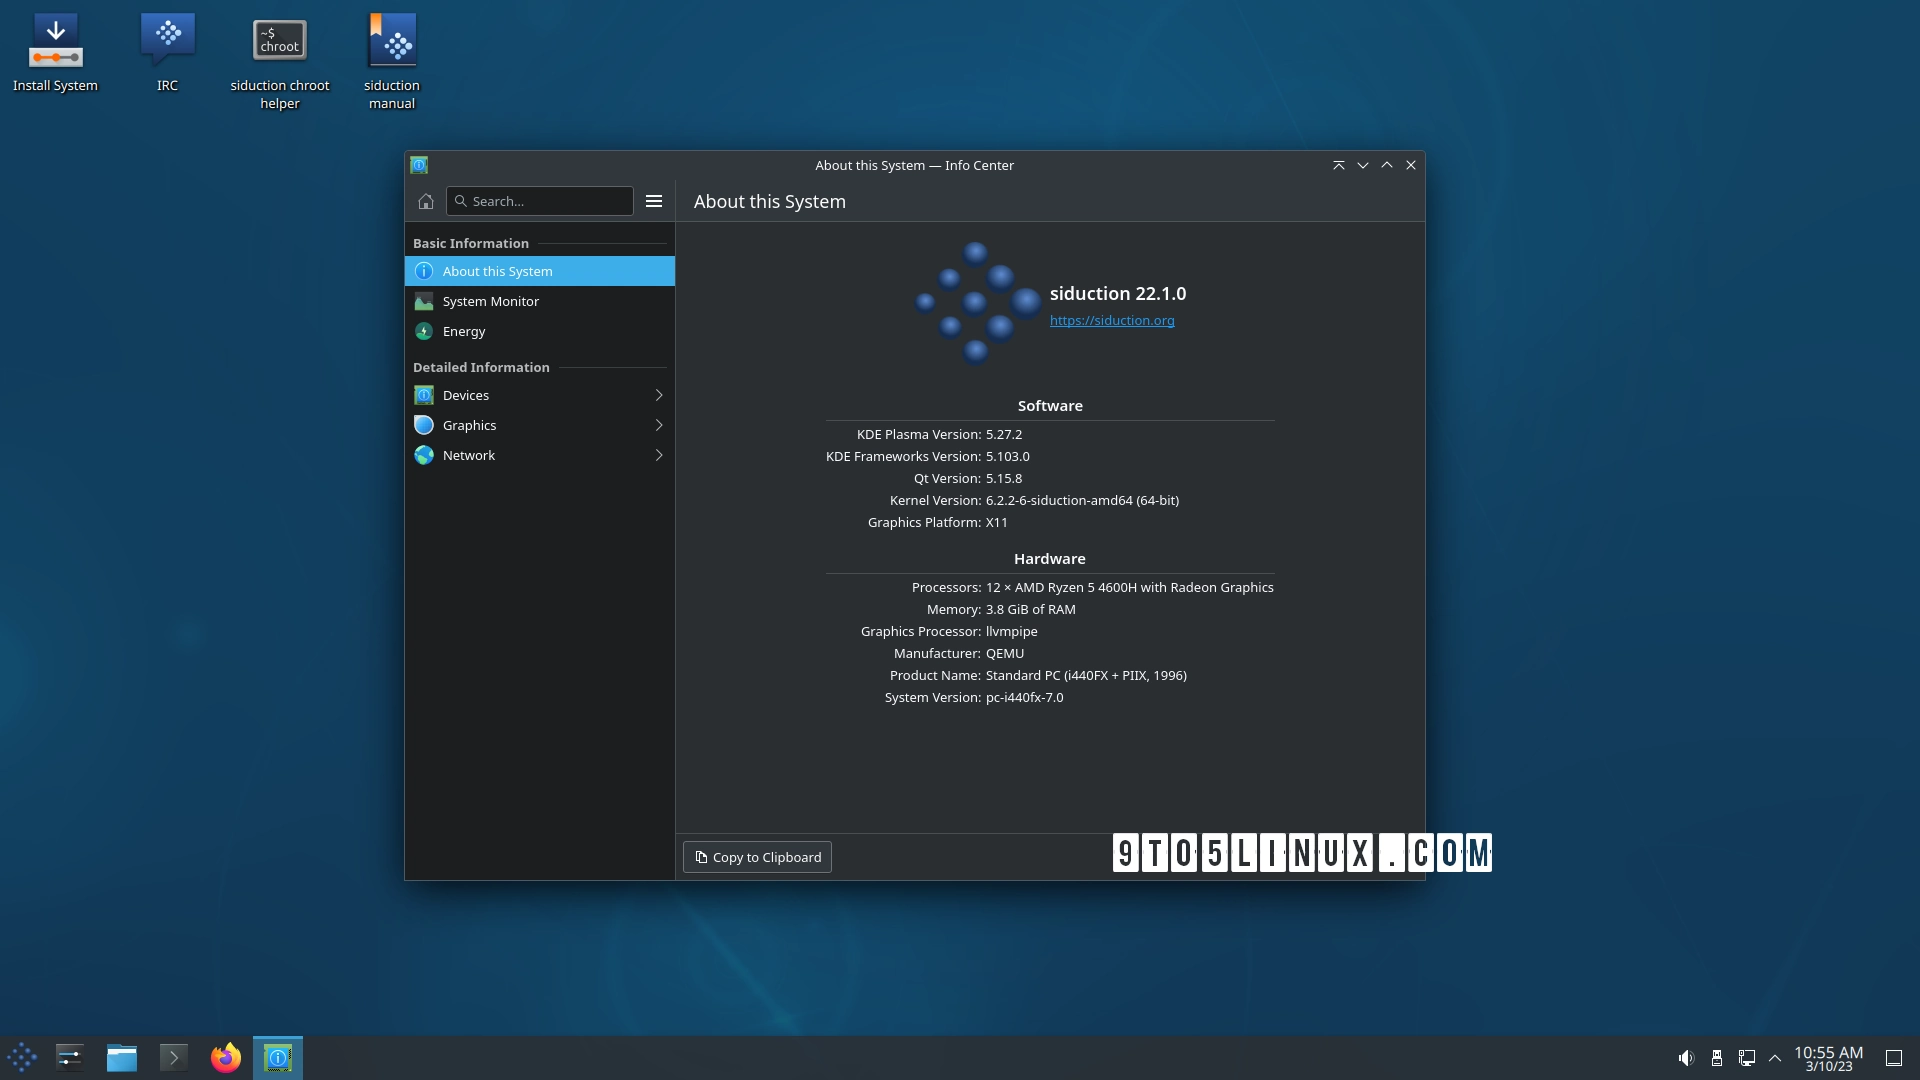 siduction 2022.1.1 “Masters of War” Arrives with Linux Kernel 6.2 and KDE Plasma 5.27